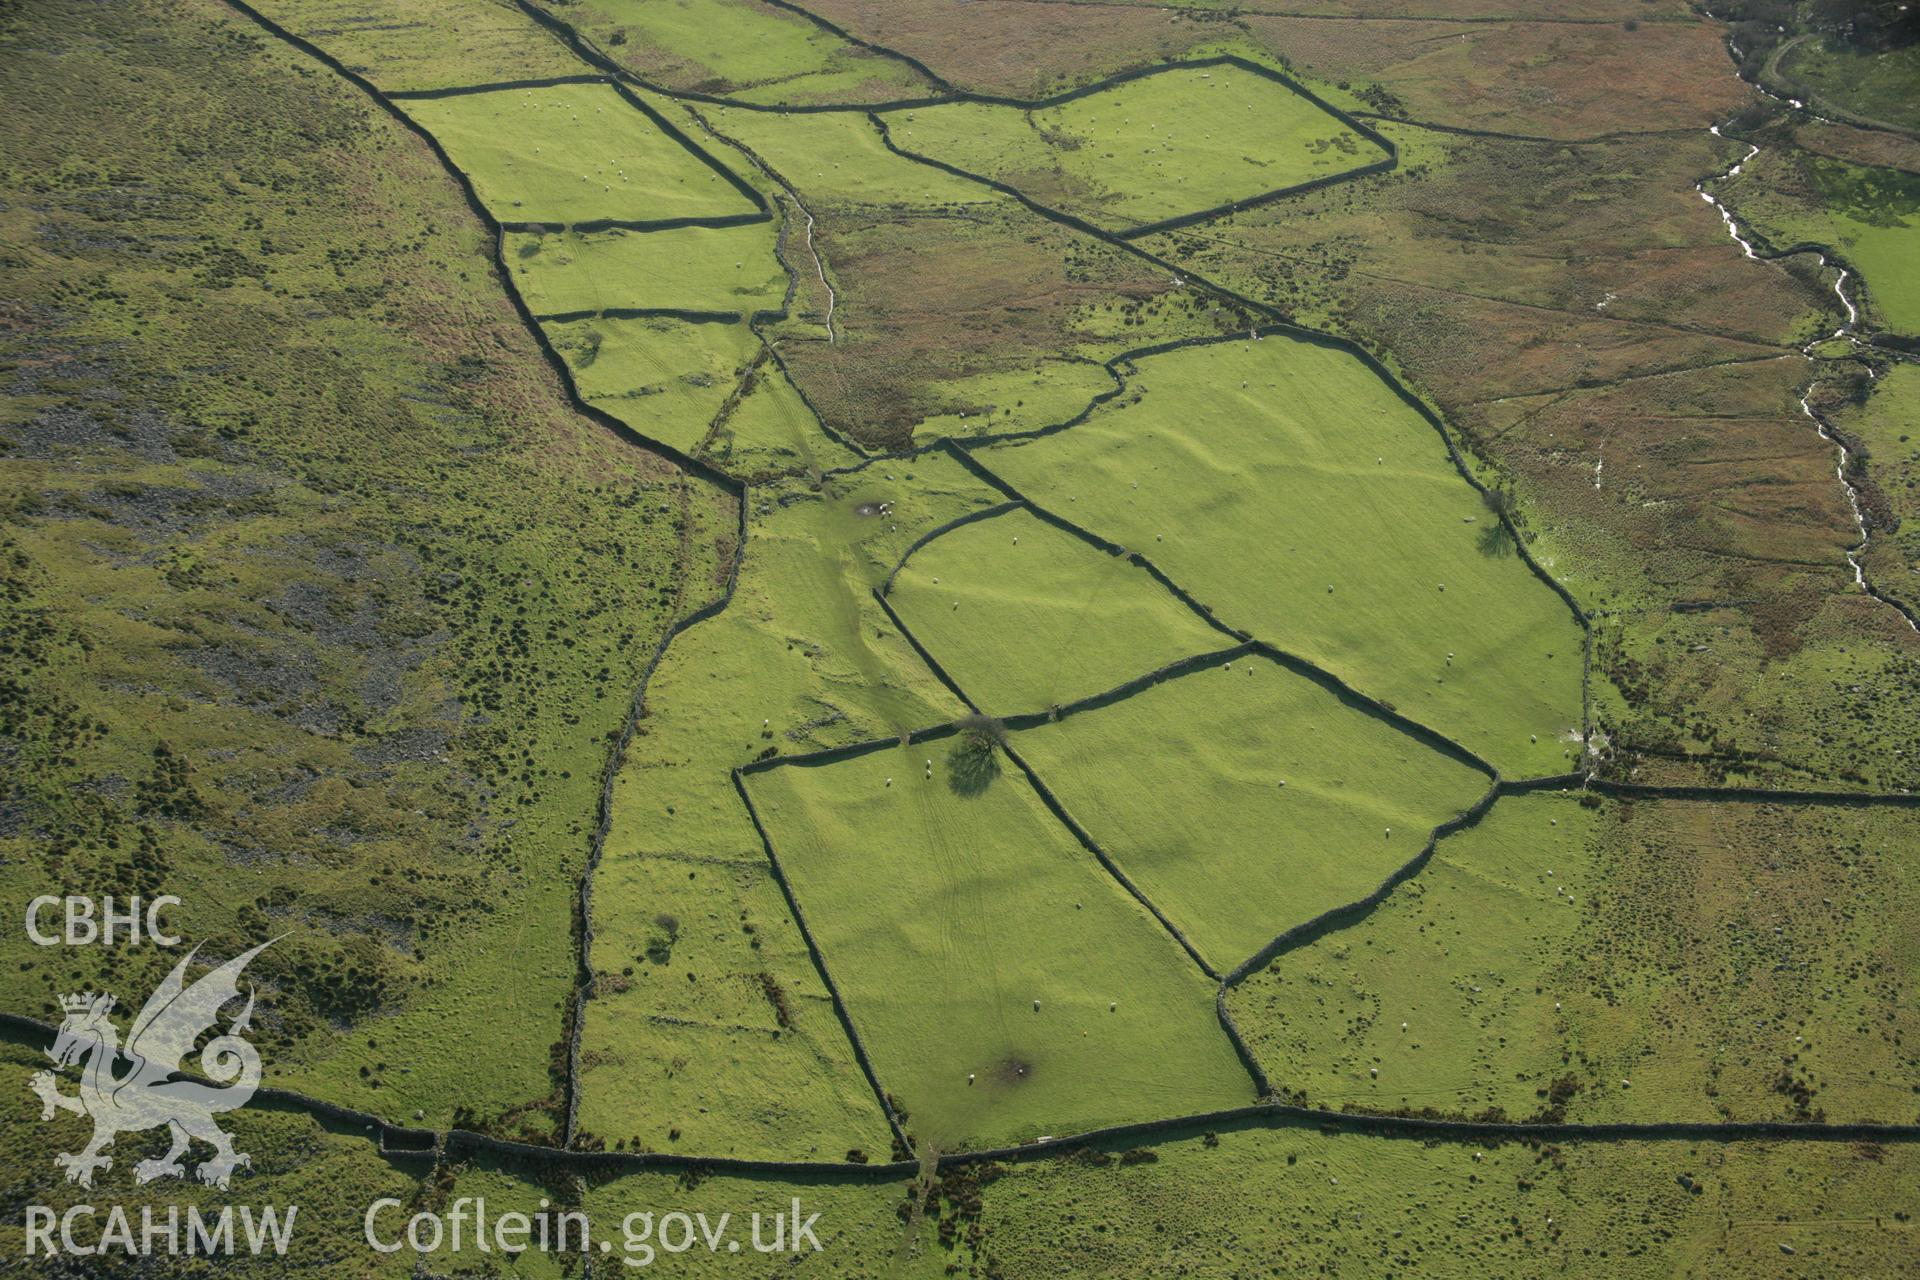 RCAHMW colour oblique aerial photograph of a relict field system at Tyddyn-Mawr. Taken on 25 January 2007 by Toby Driver